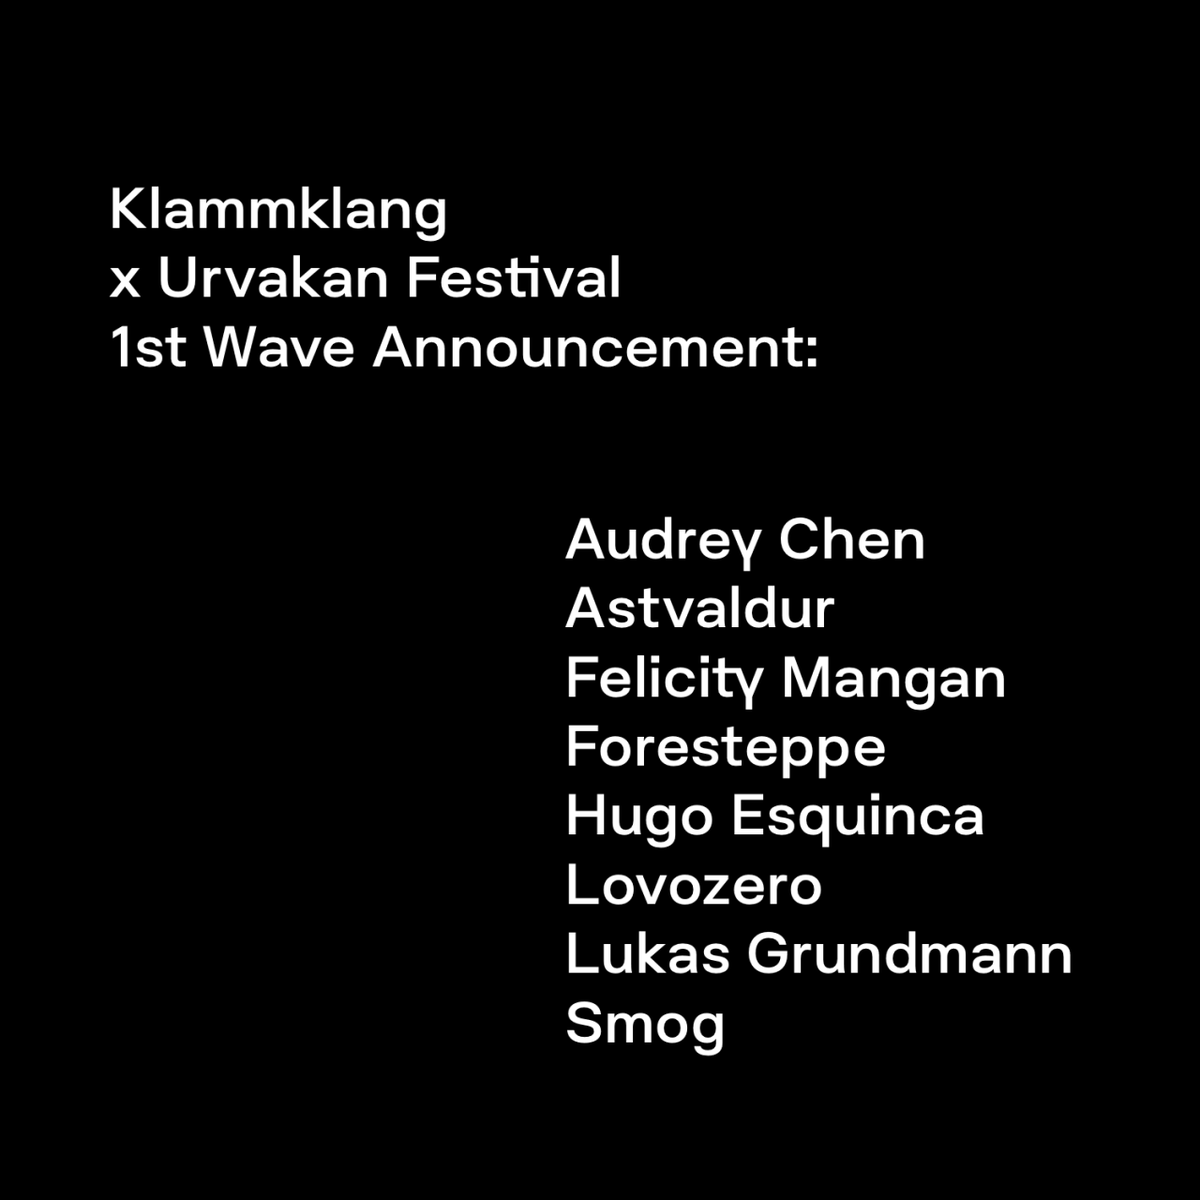 This year we join the curatorial team of Urvakan Festival 2020, and a part of our input is already included in the first wave of artists' announcement featuring @lovozero_, Foresteppe, @fmangan1 & many more Info & tickets at urvakan.com